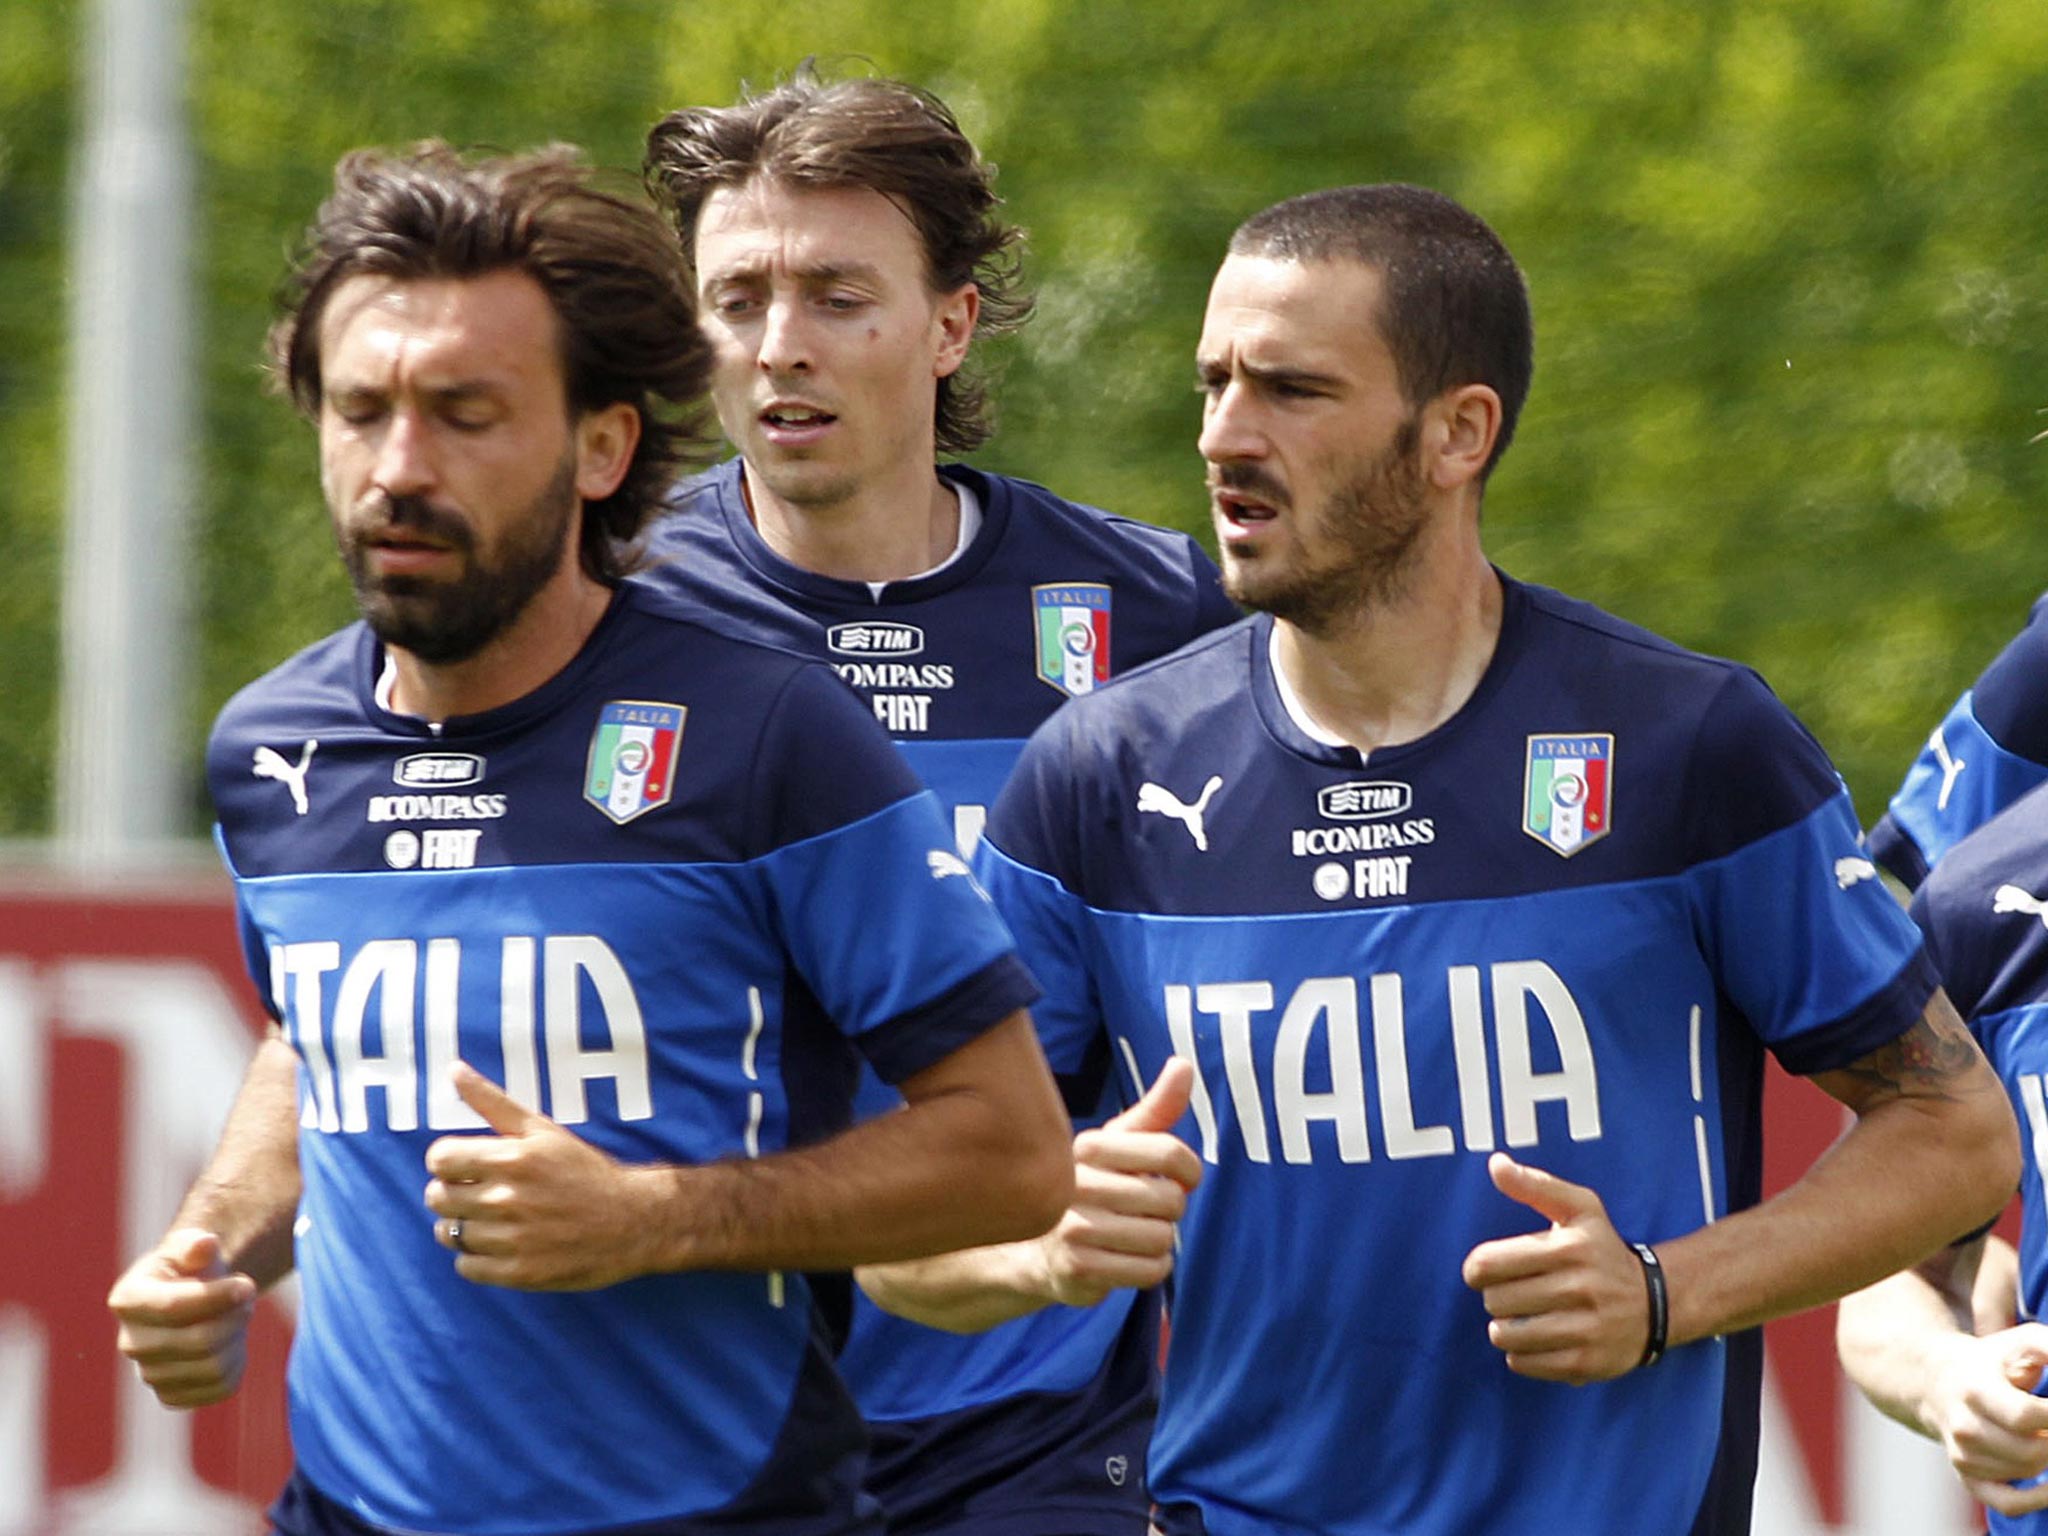 Andrea Pirlo, Riccardo Montolivo and Ciro Immobile in training with Italy as they prepare for the World Cup